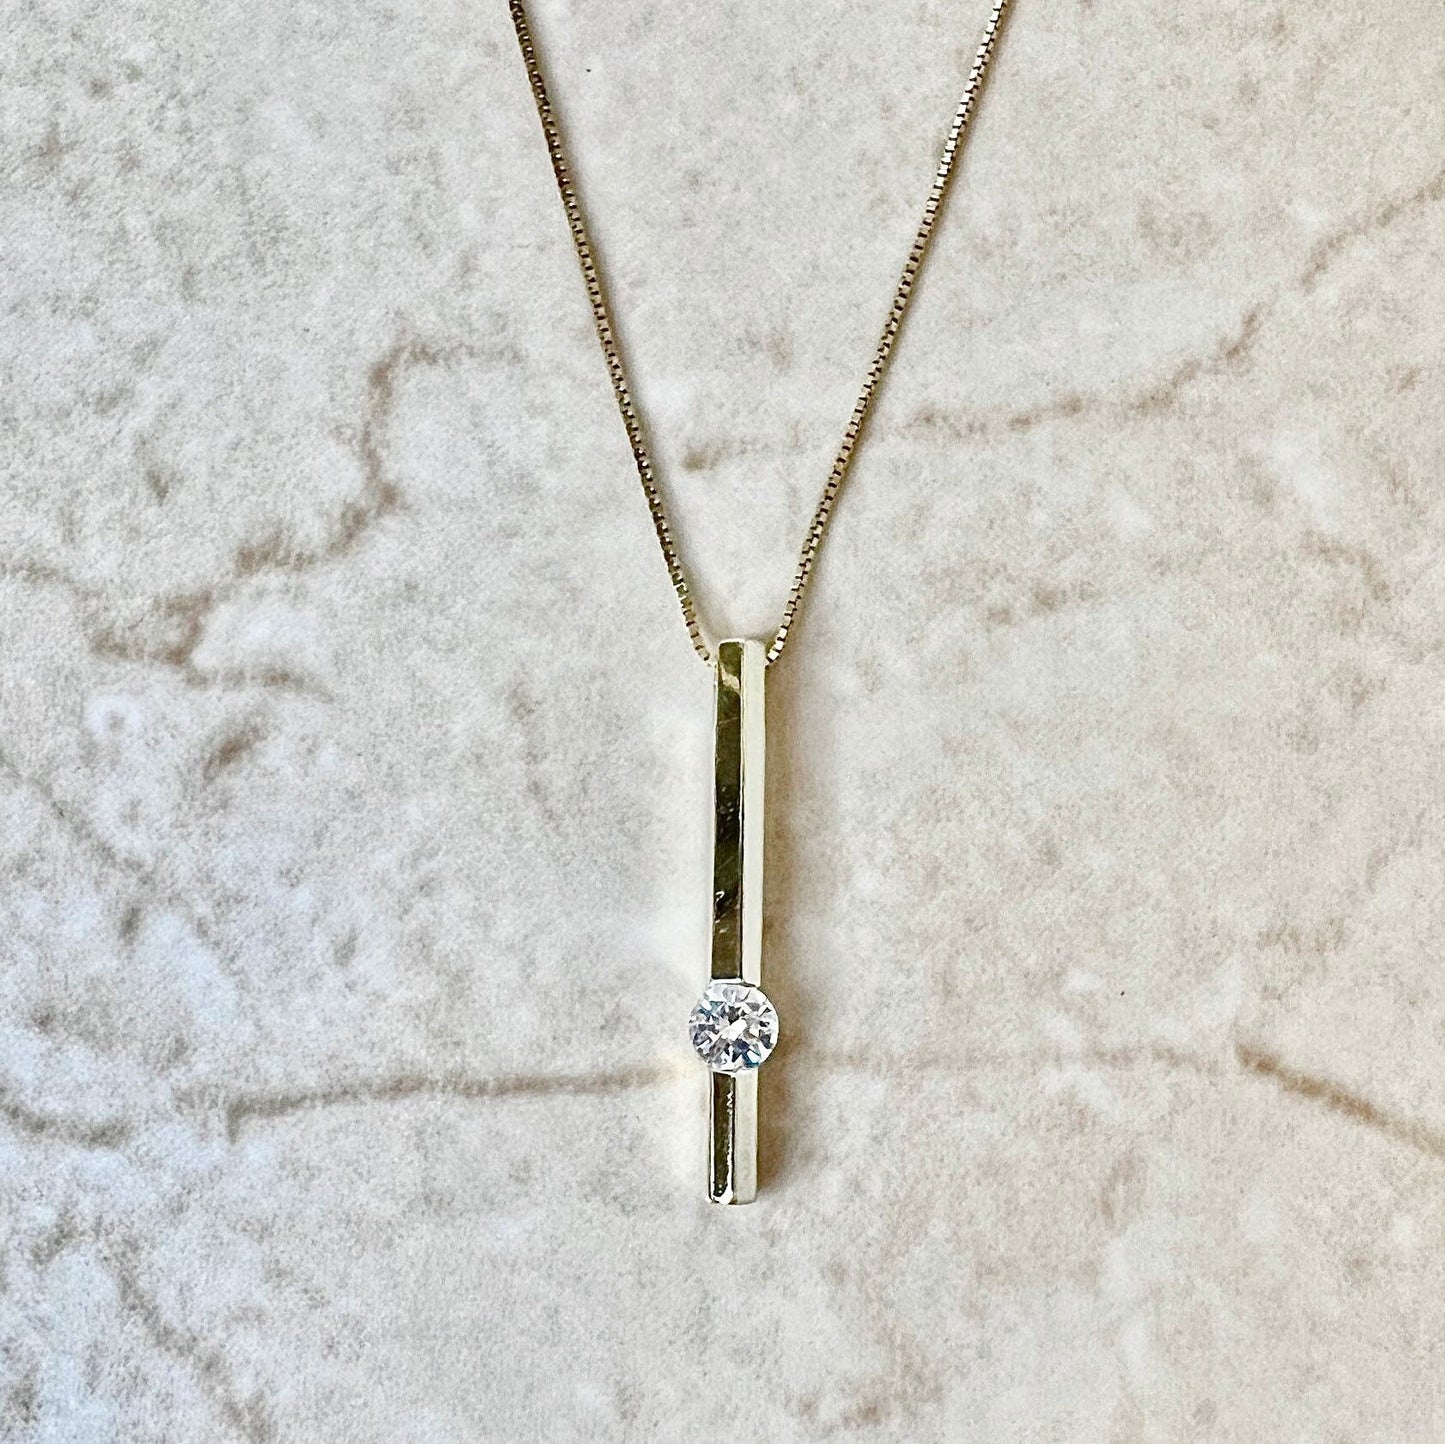 Vintage 14K Diamond Solitaire Pendant Necklace - Yellow Gold Bar Diamond Necklace - Diamond Pendant - Birthday Gift - Best Gift For Her